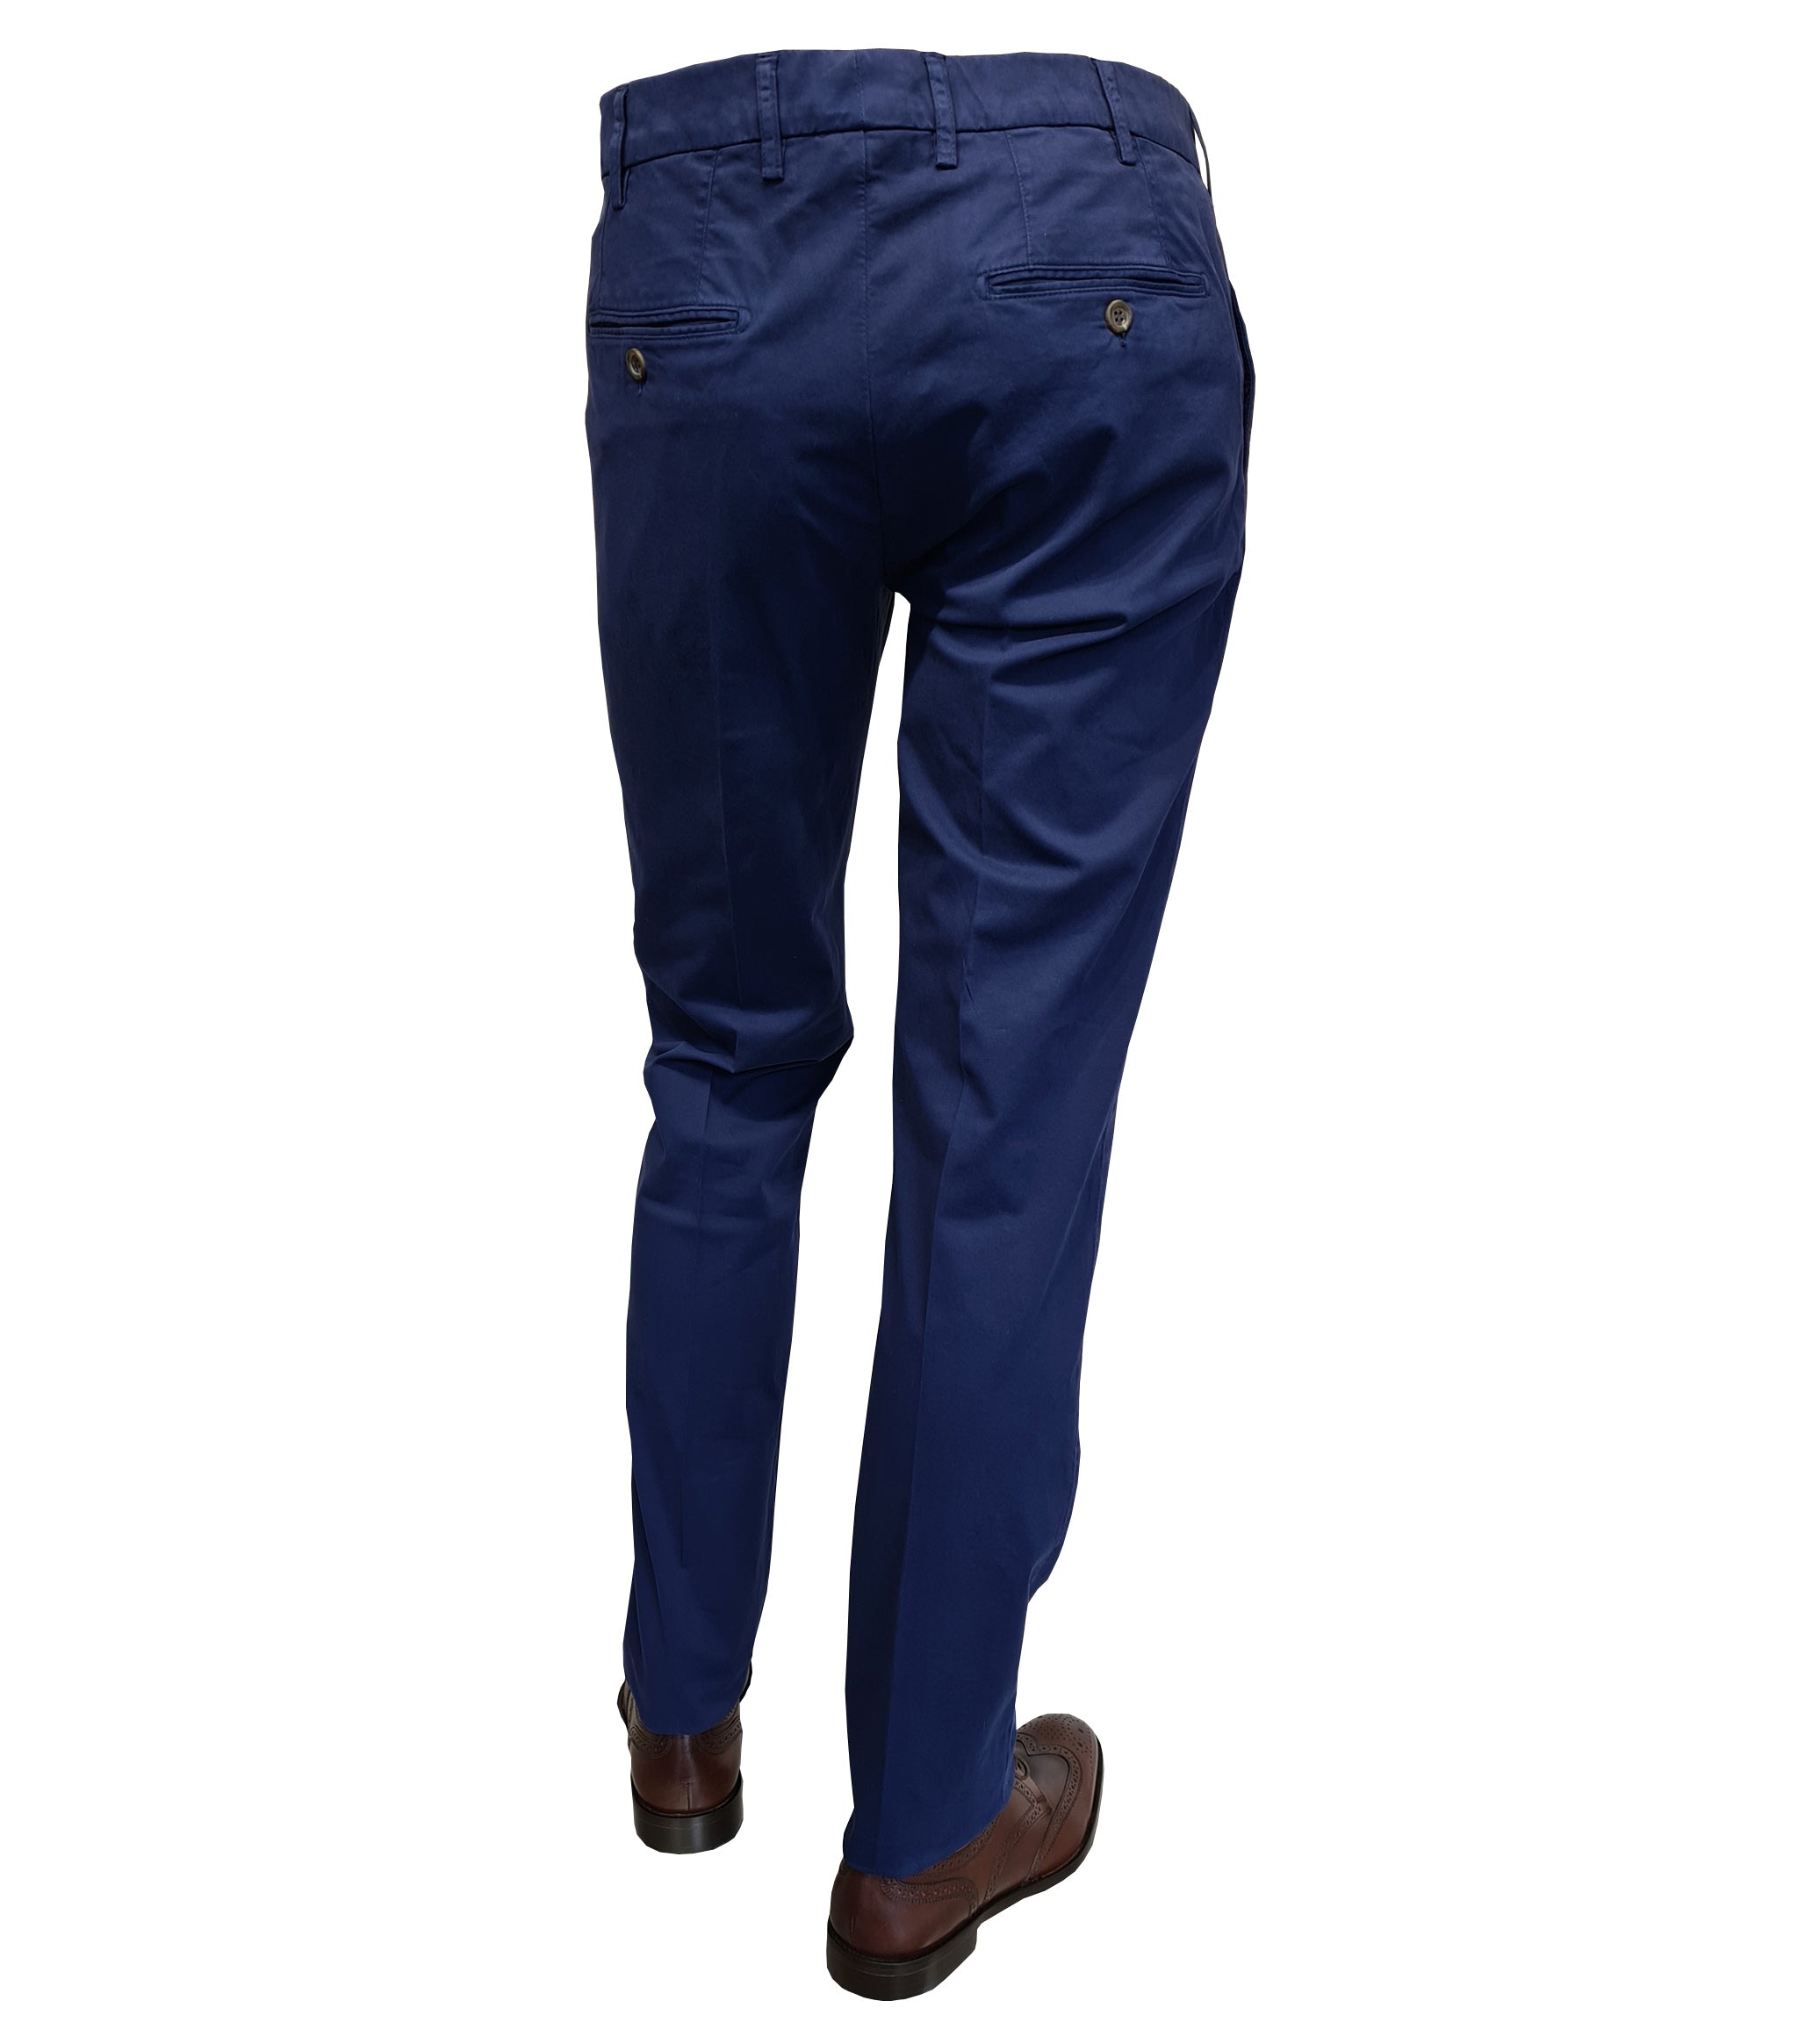 CANALI - Navy Blue Chinos In Garment Dyed Cotton Microtwill - 91633-PT00452-306